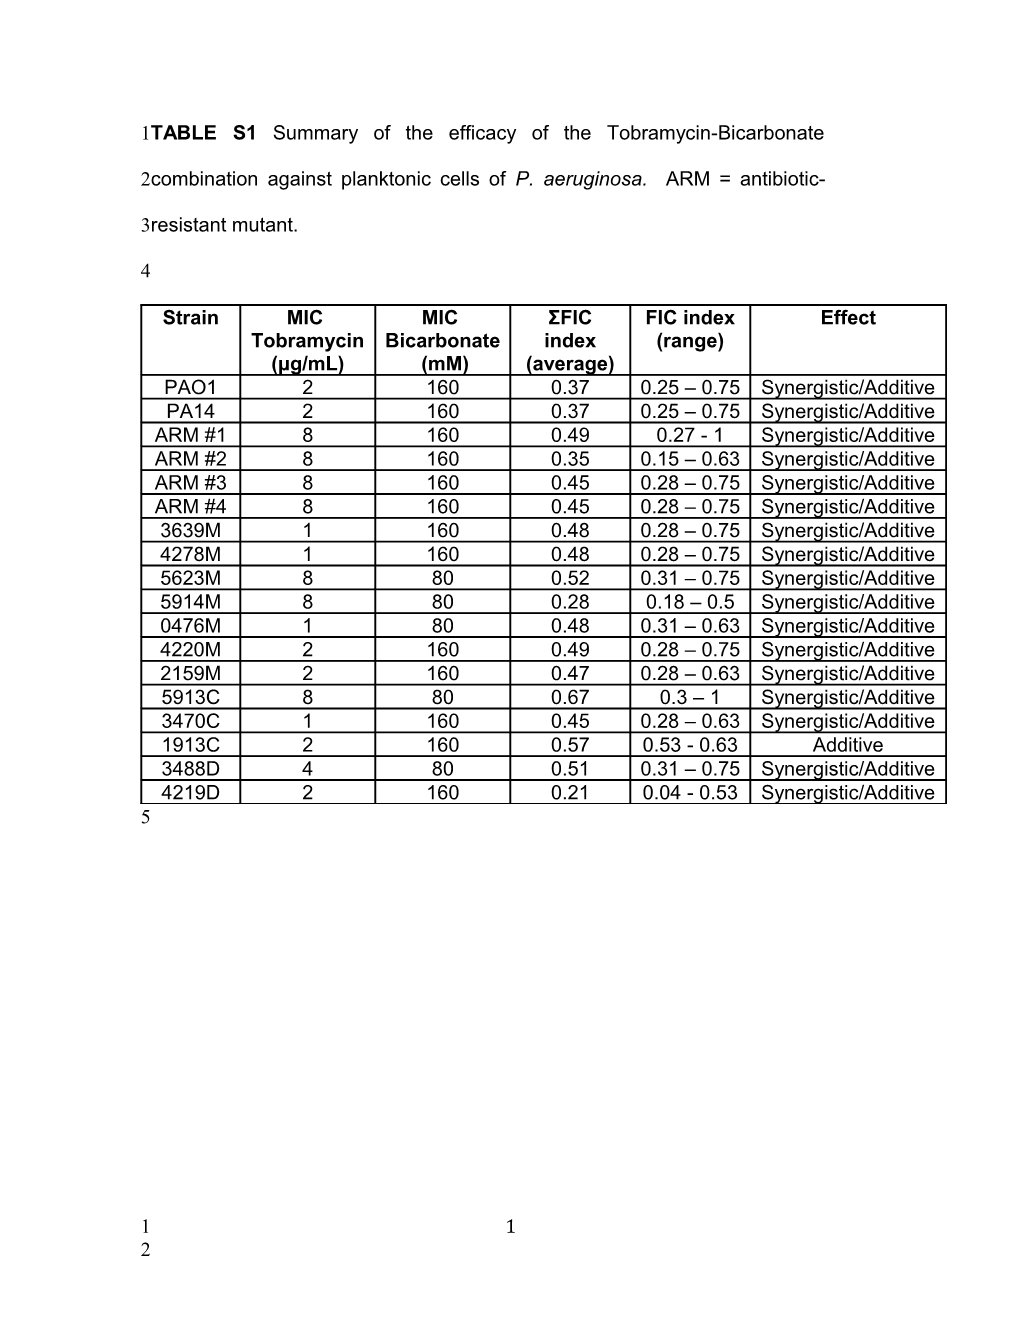 TABLE S3 Efficacy of the Tobramycin-Bicarbonate Combination Against Biofilm Cells of P